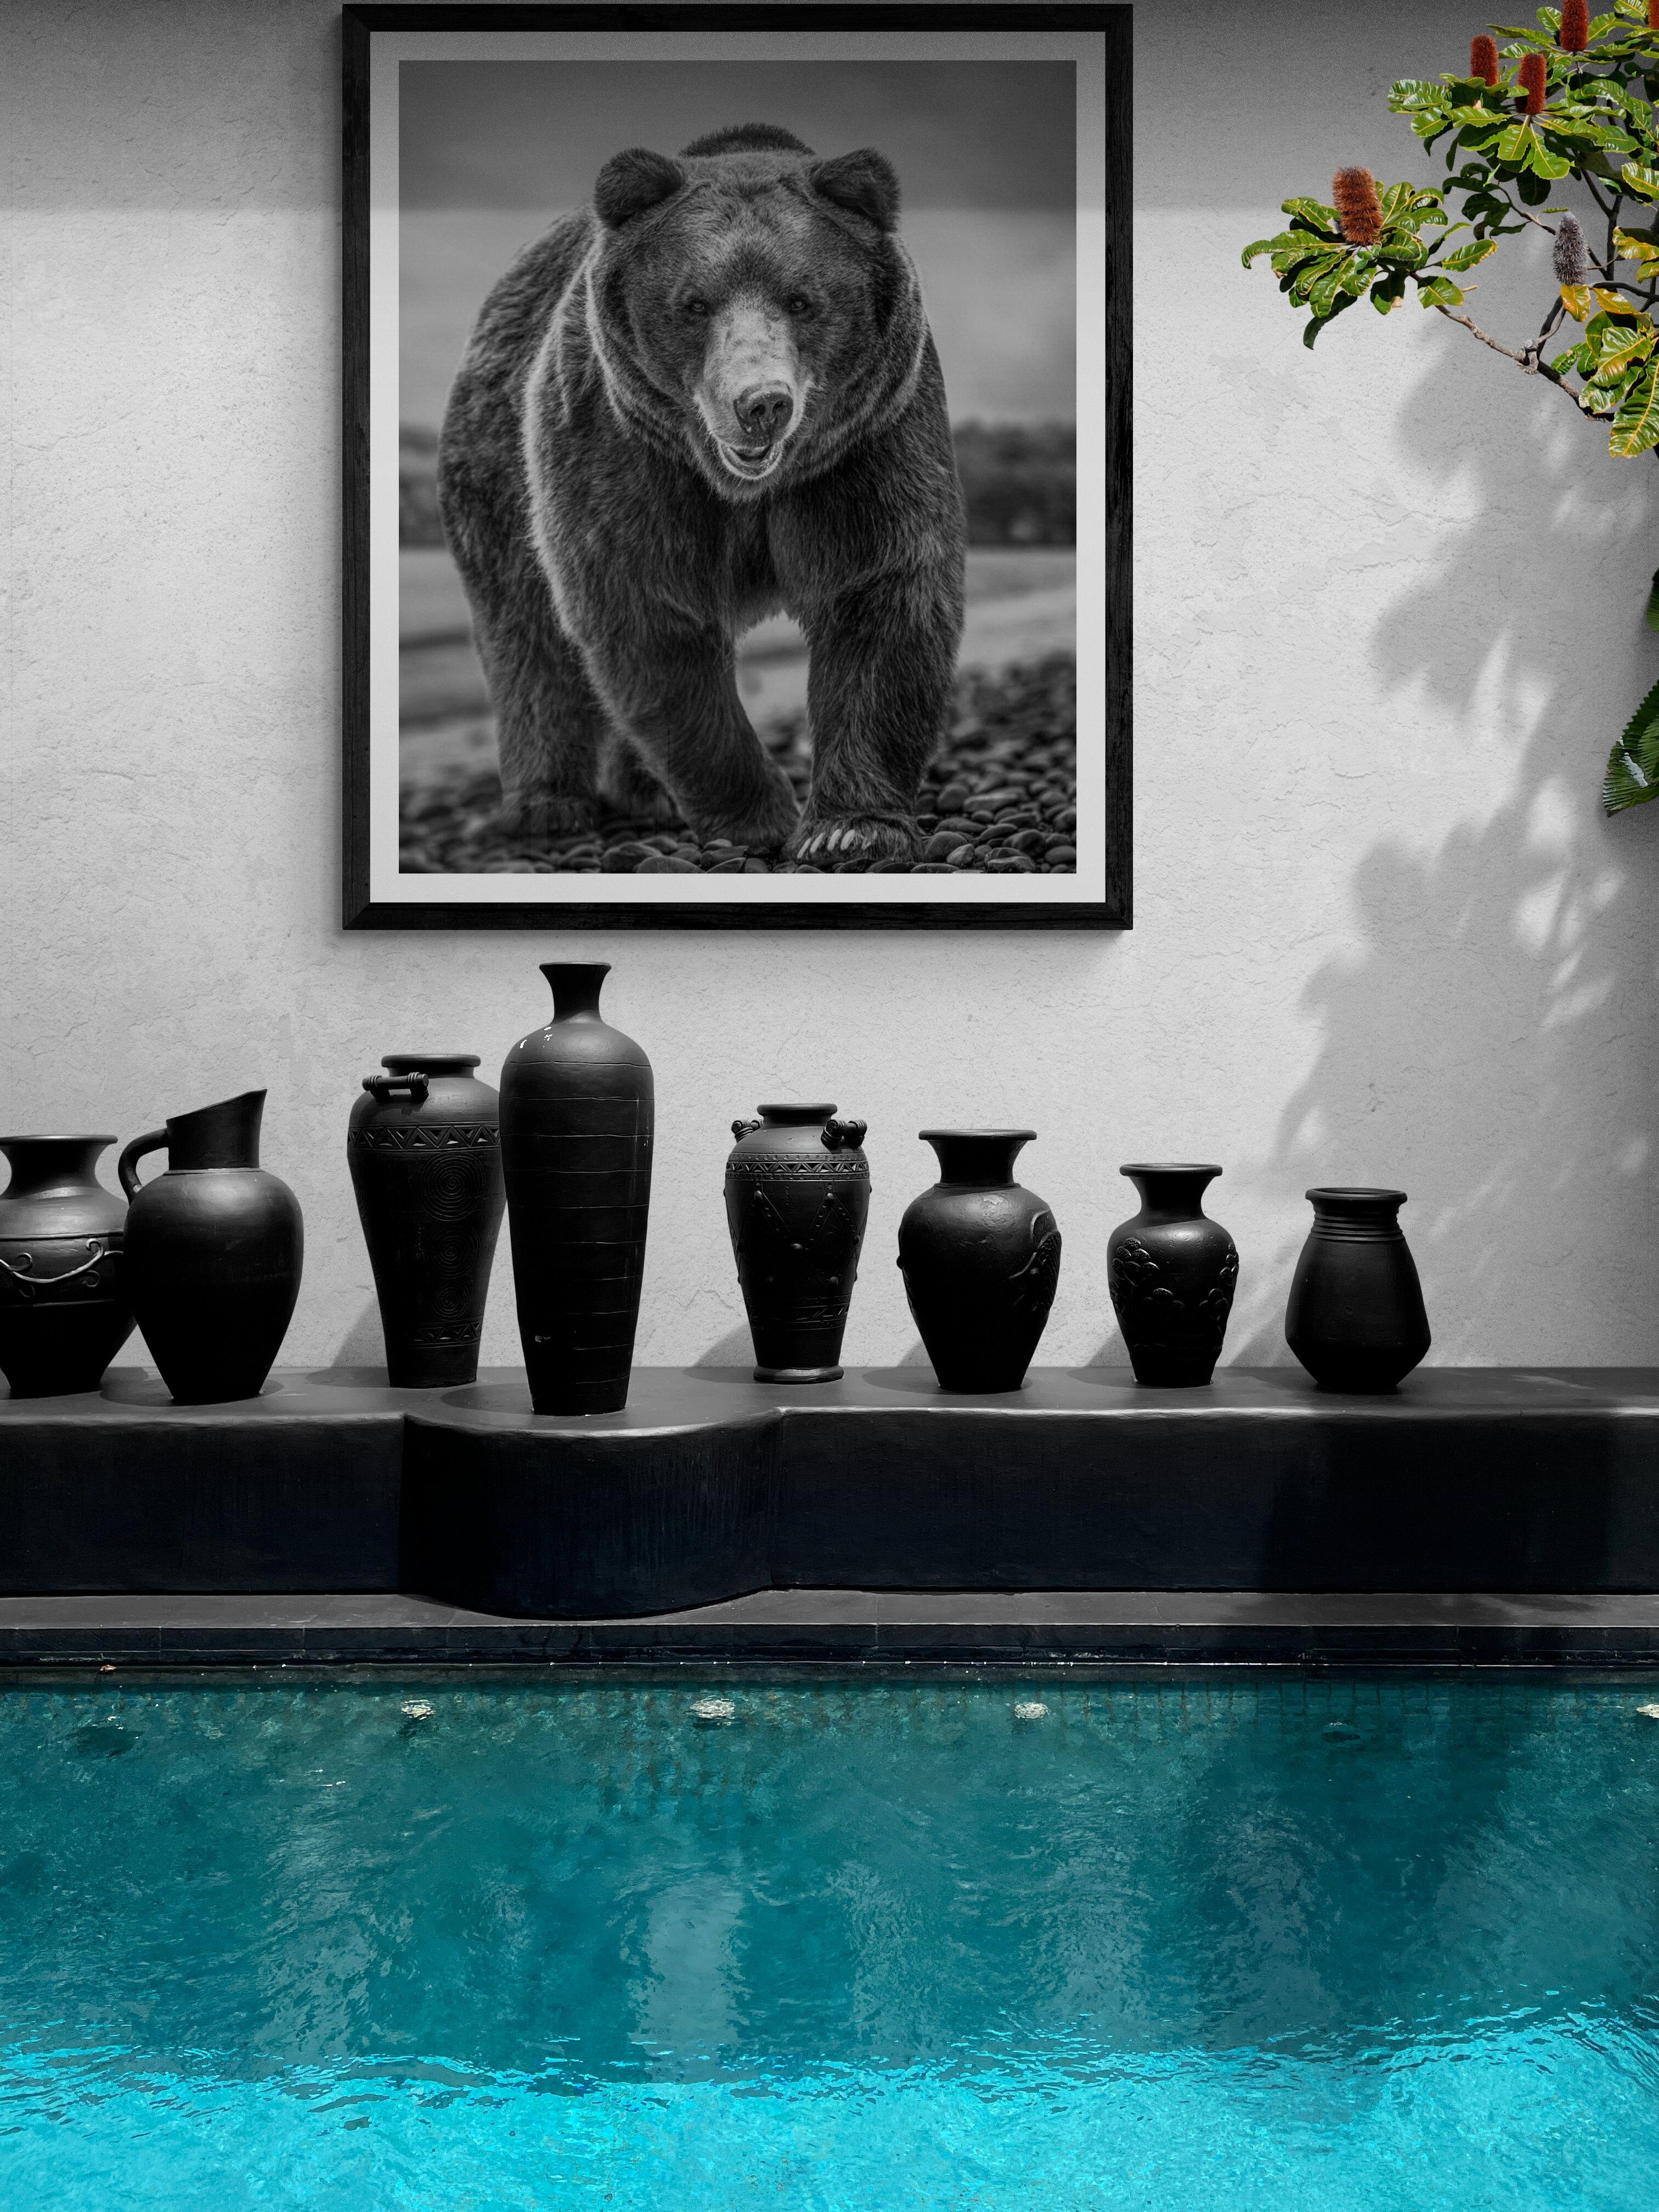 Black & White Photography, Grizzly Bear, Fine Art Photograph 